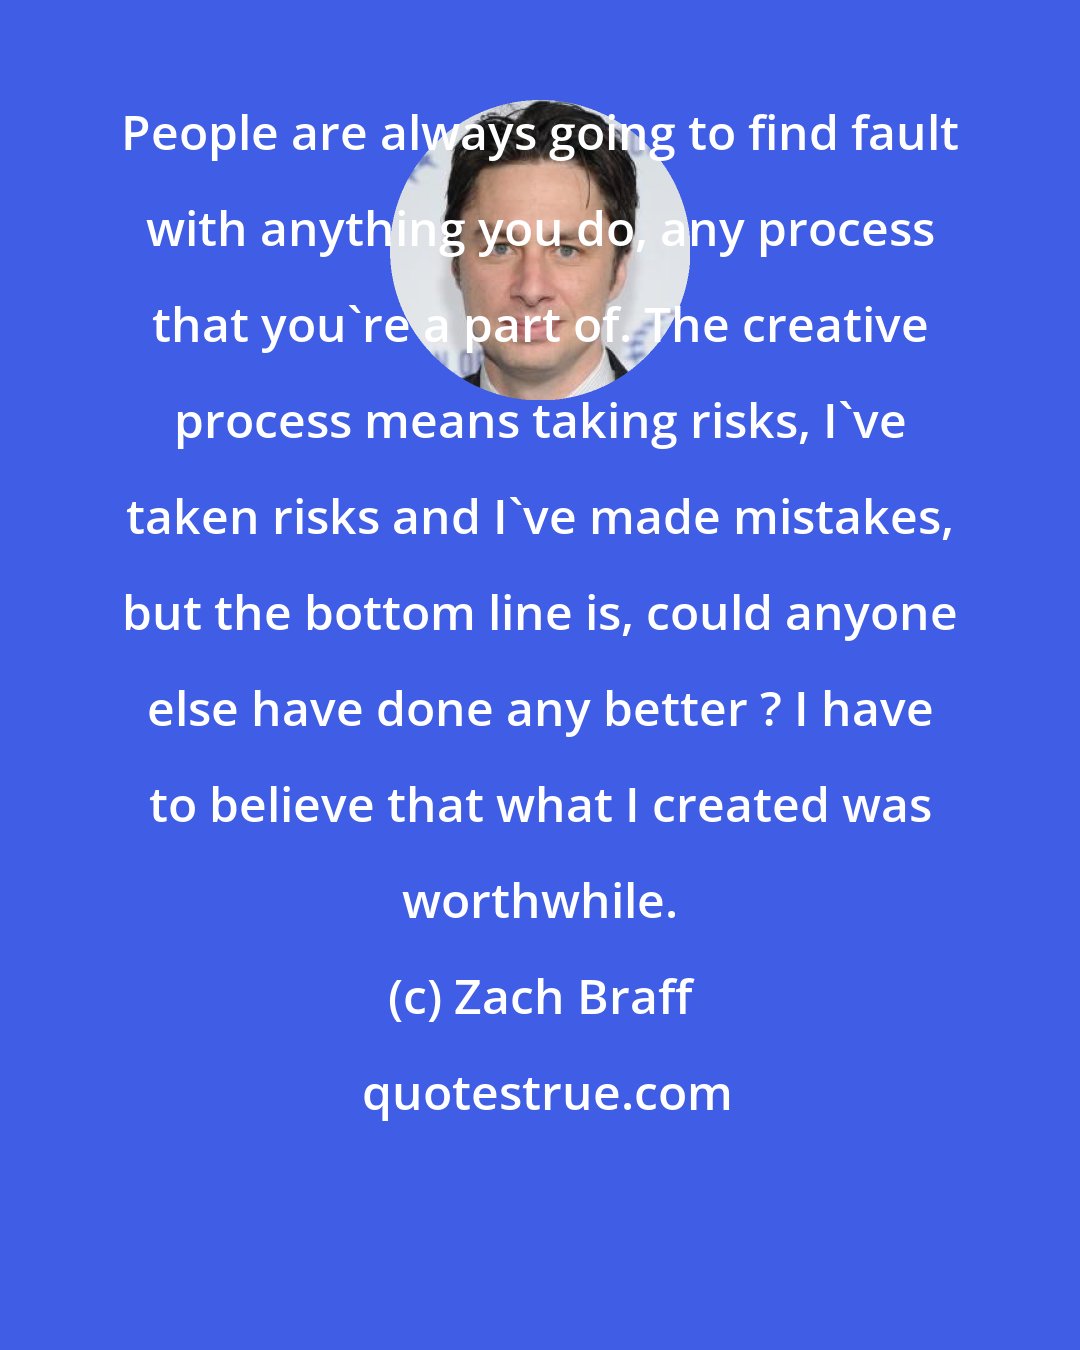 Zach Braff: People are always going to find fault with anything you do, any process that you're a part of. The creative process means taking risks, I've taken risks and I've made mistakes, but the bottom line is, could anyone else have done any better ? I have to believe that what I created was worthwhile.